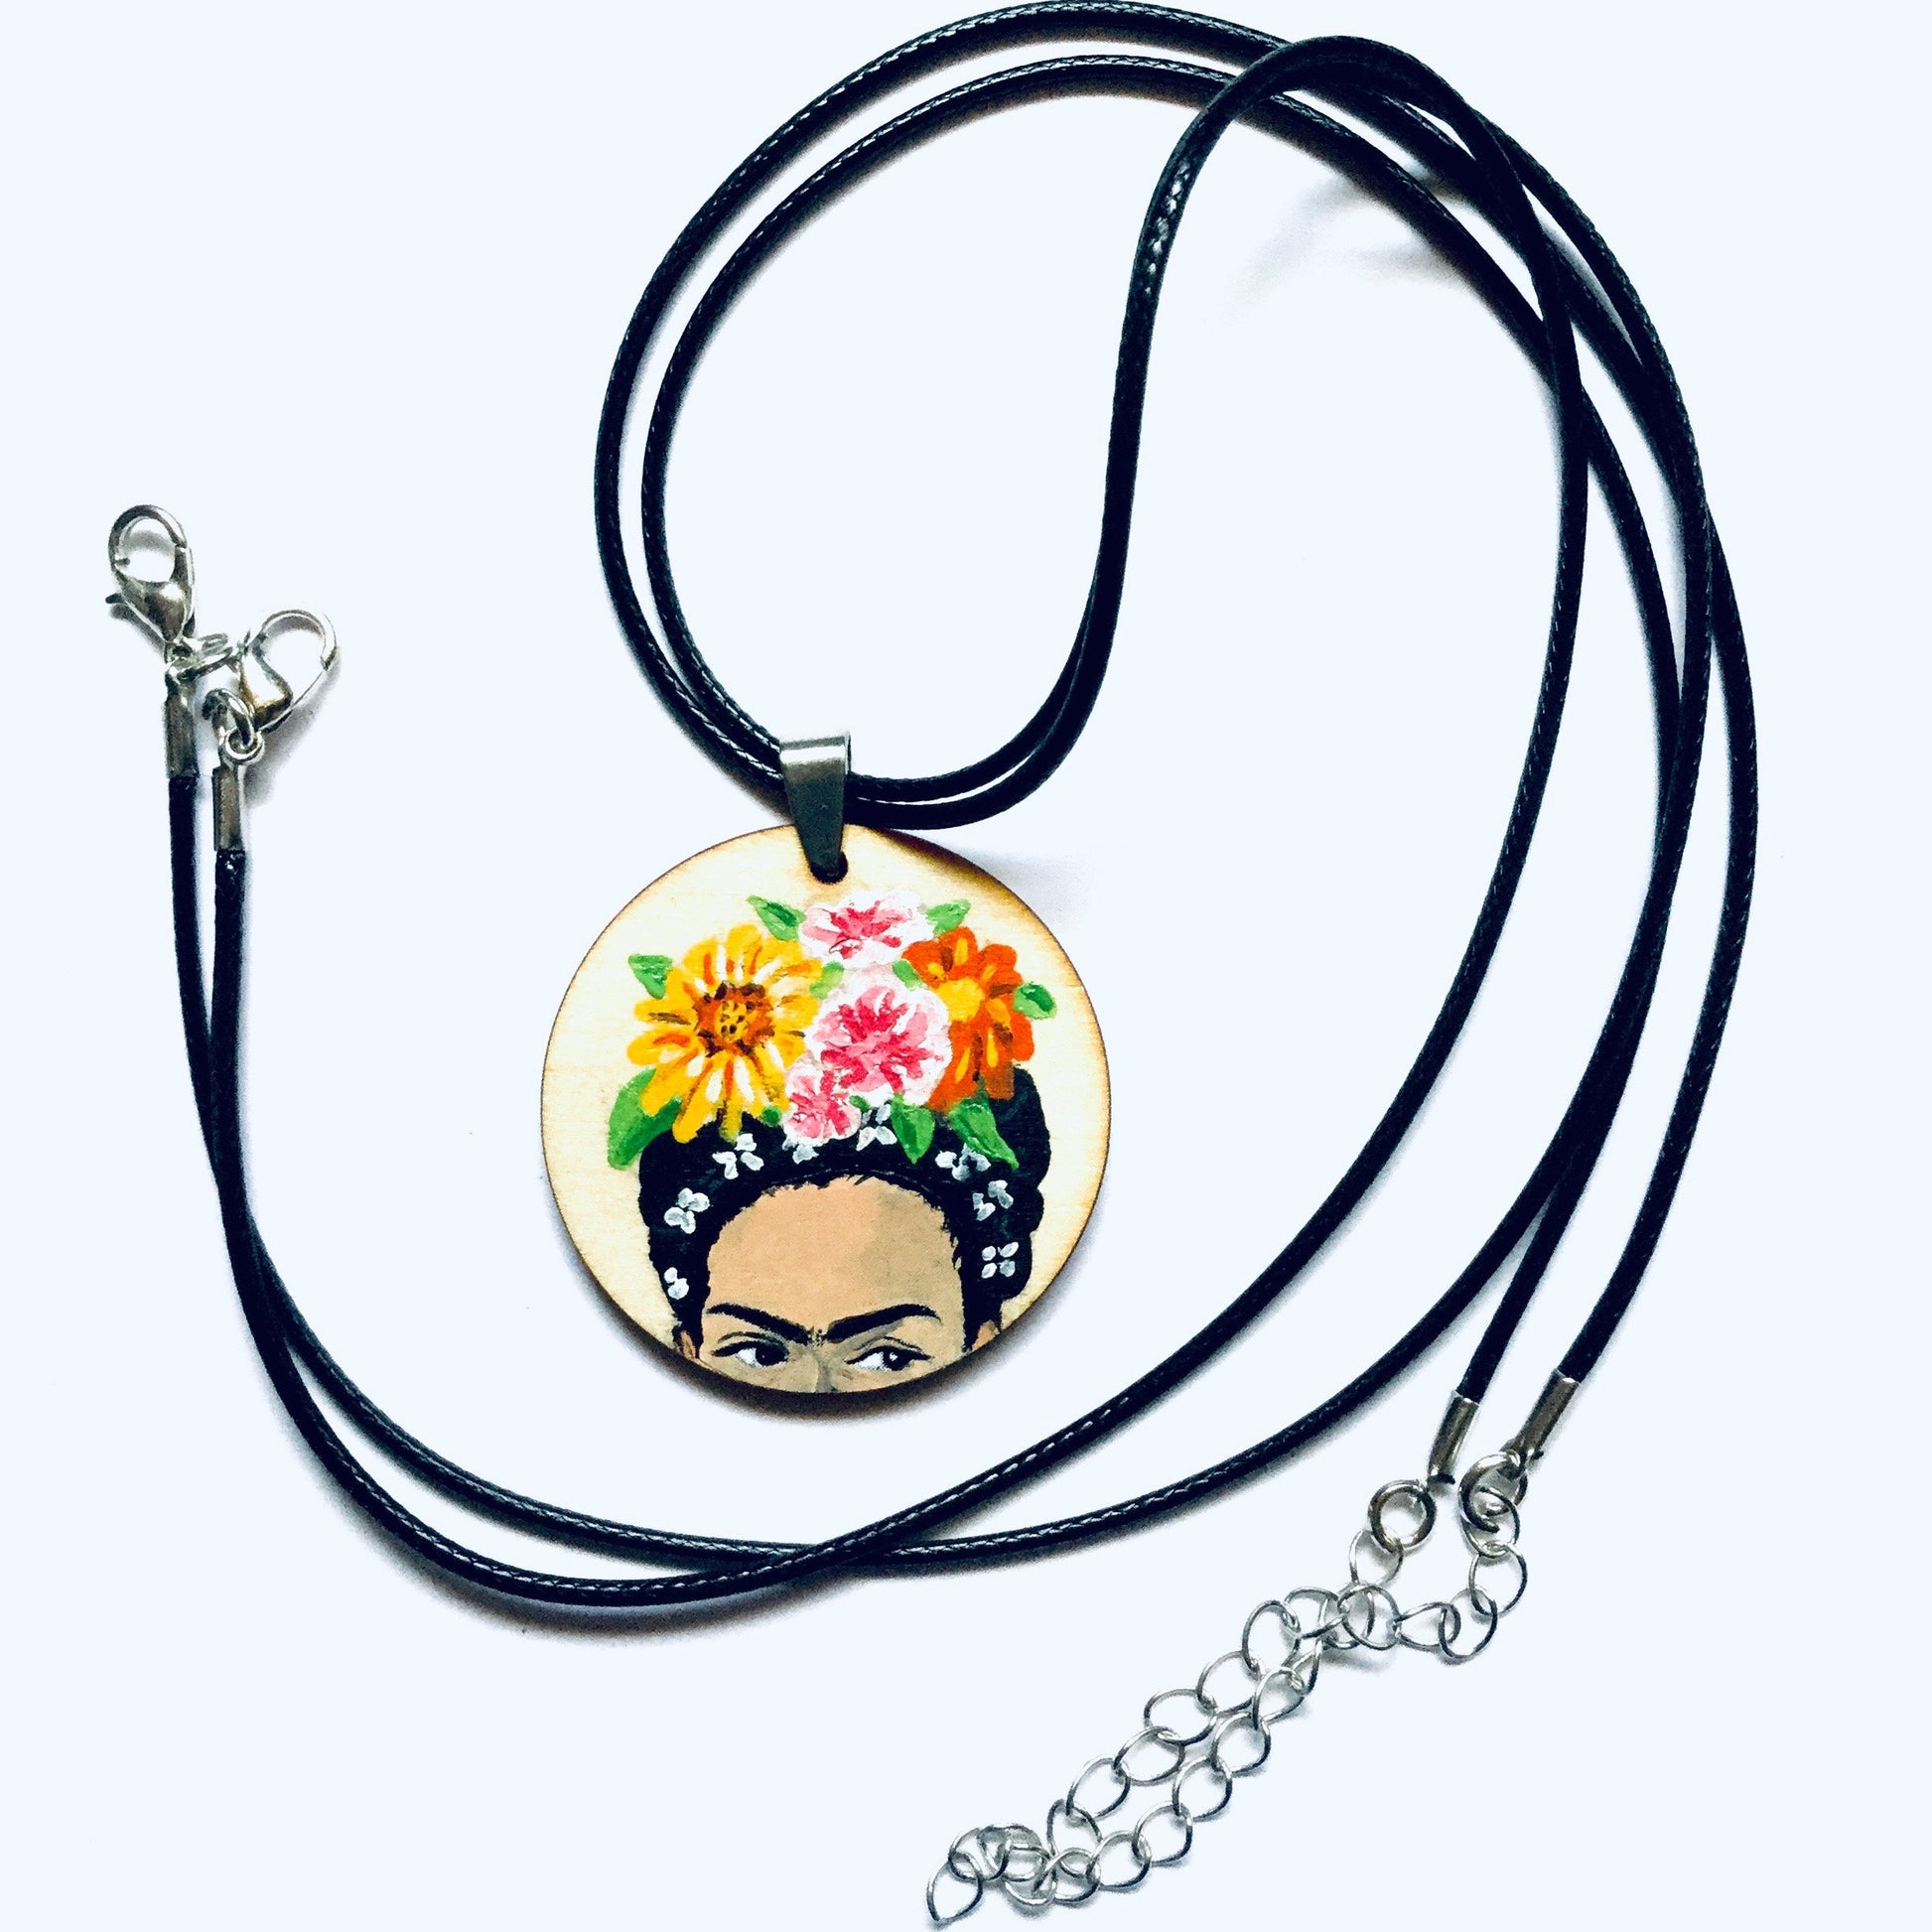 Floral Frida Pendant Necklace Hand Painted Wooden Floral Pendant Mexican Jewelry Girl Pendant Frida Artwear Wearable Art Frida Inspired Art